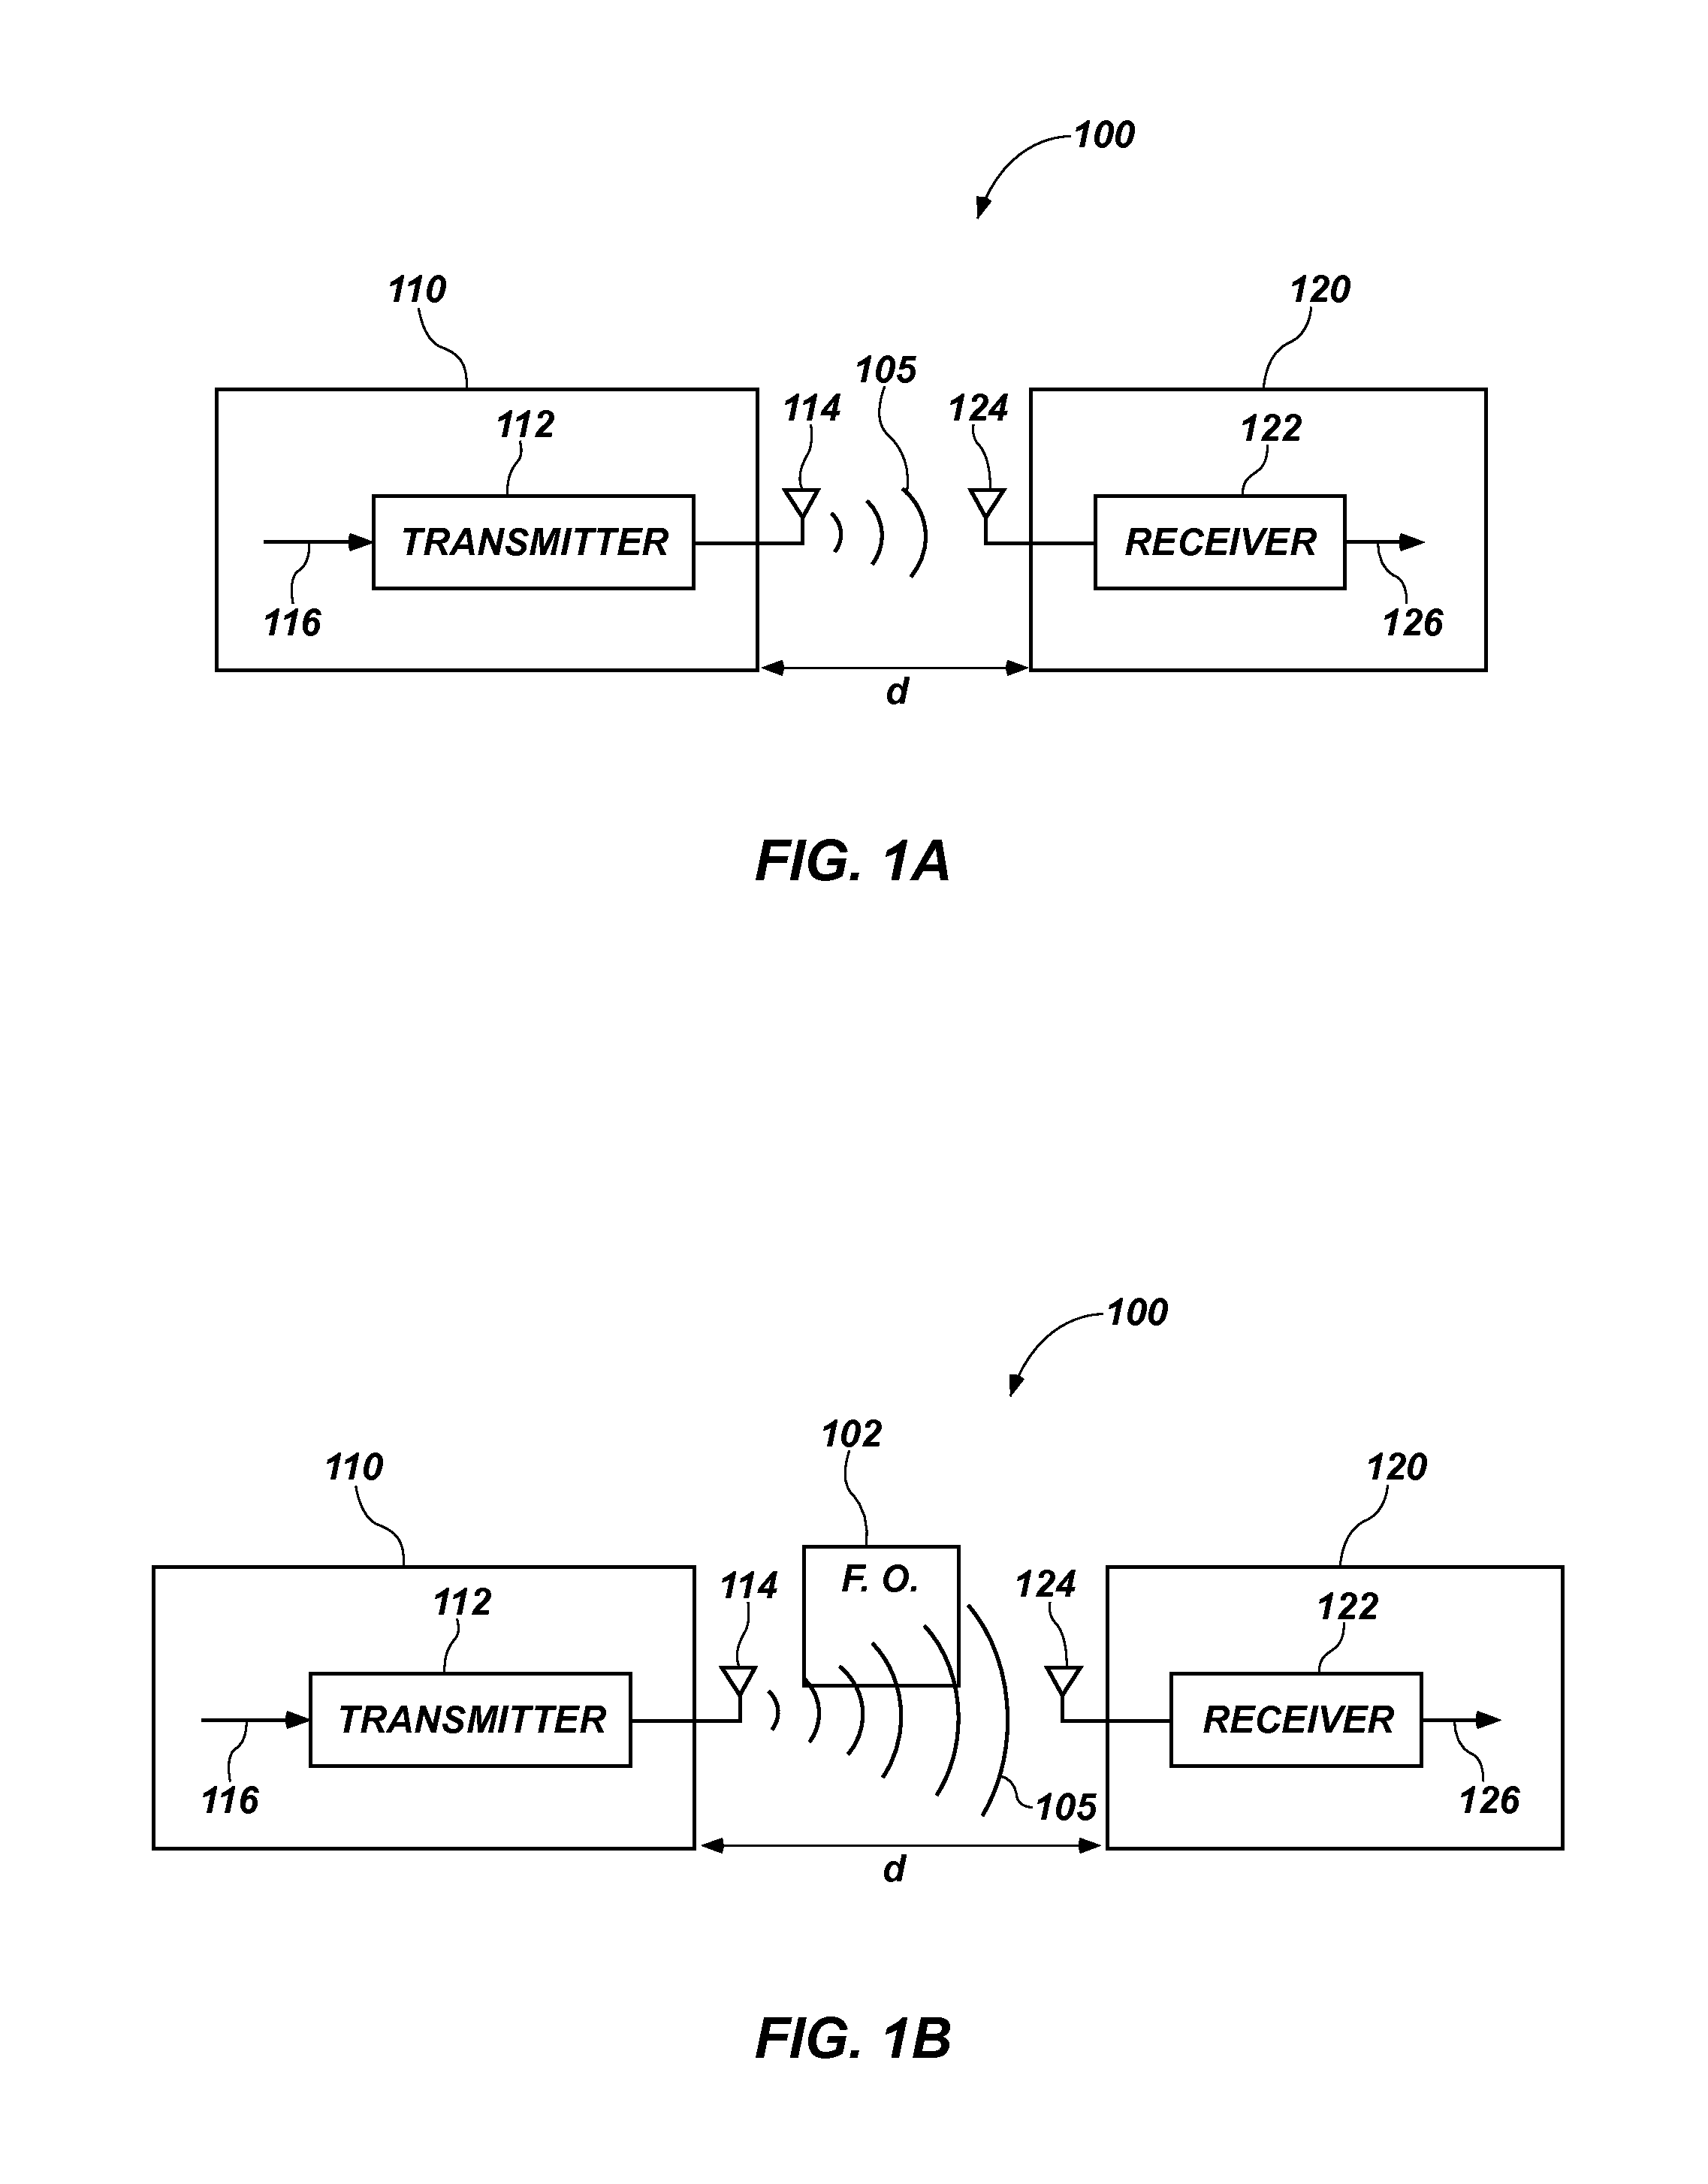 Apparatus, system, and method for detecting a foreign object in an inductive wireless power transfer system based on input power